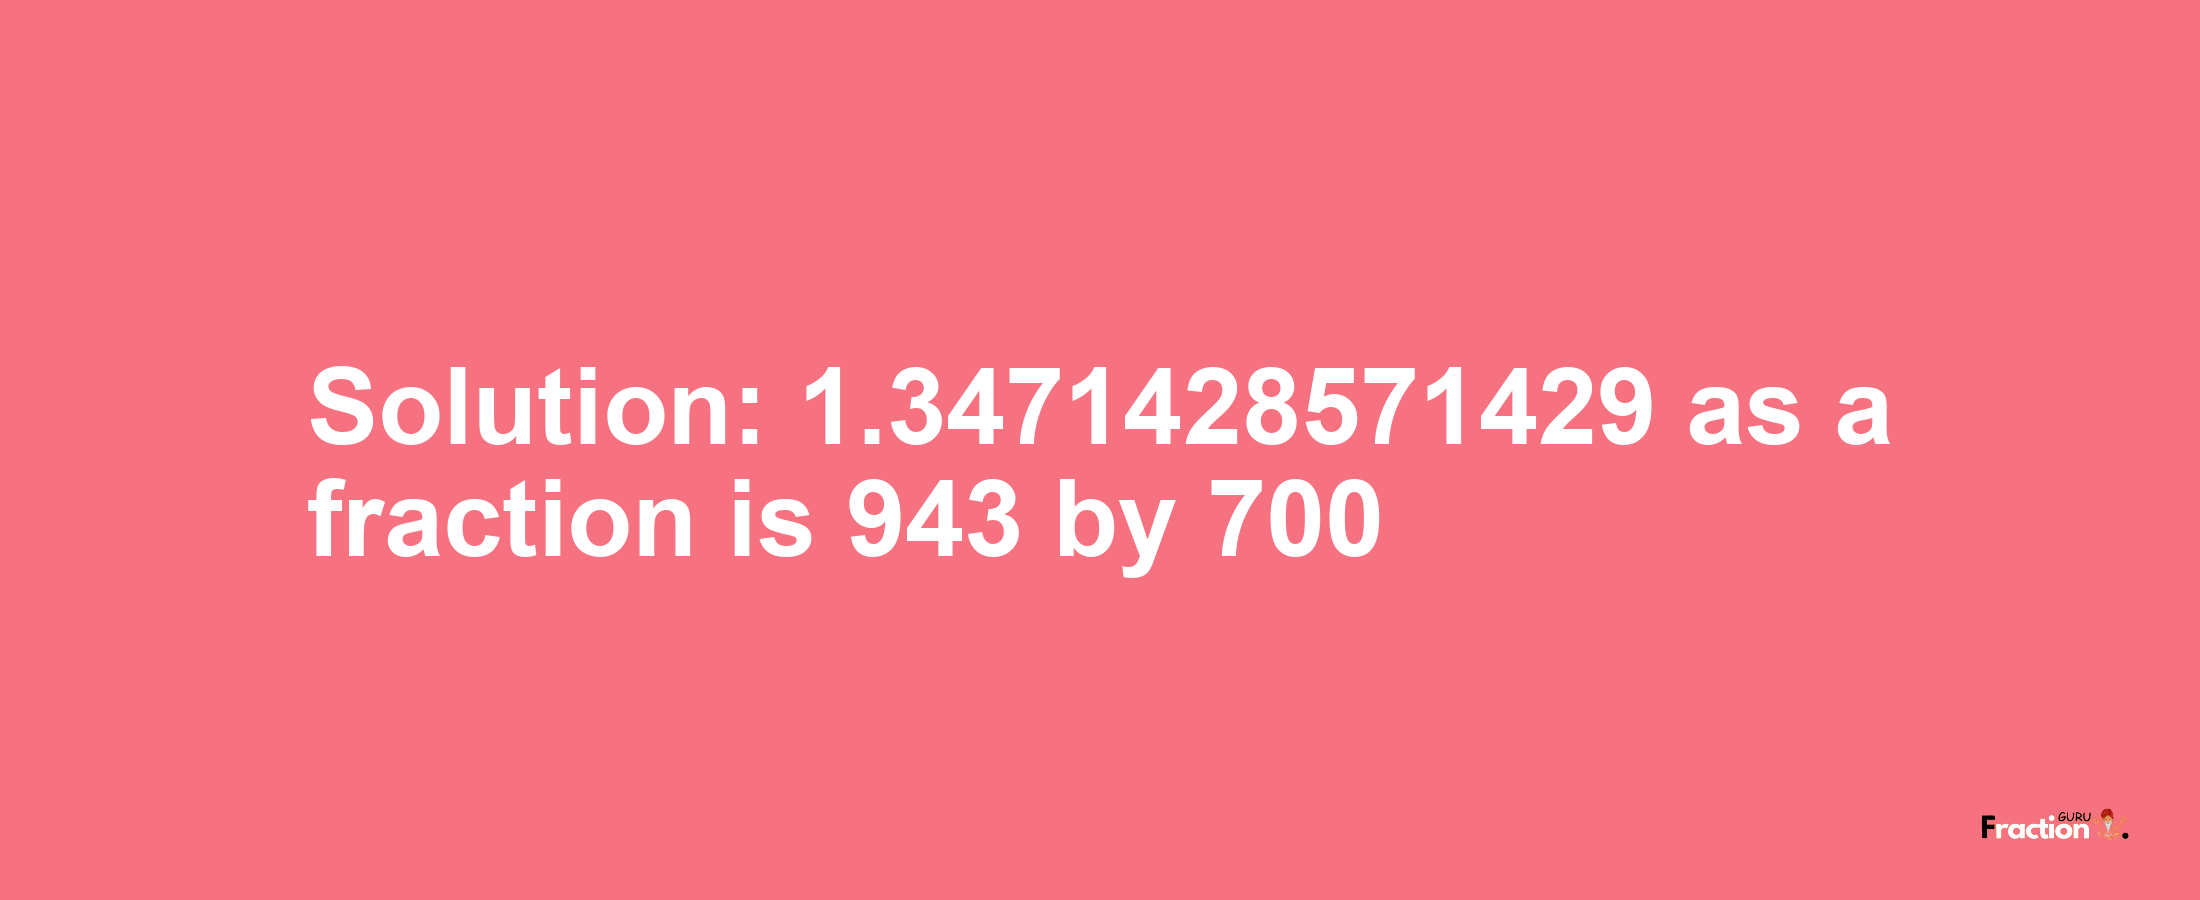 Solution:1.3471428571429 as a fraction is 943/700